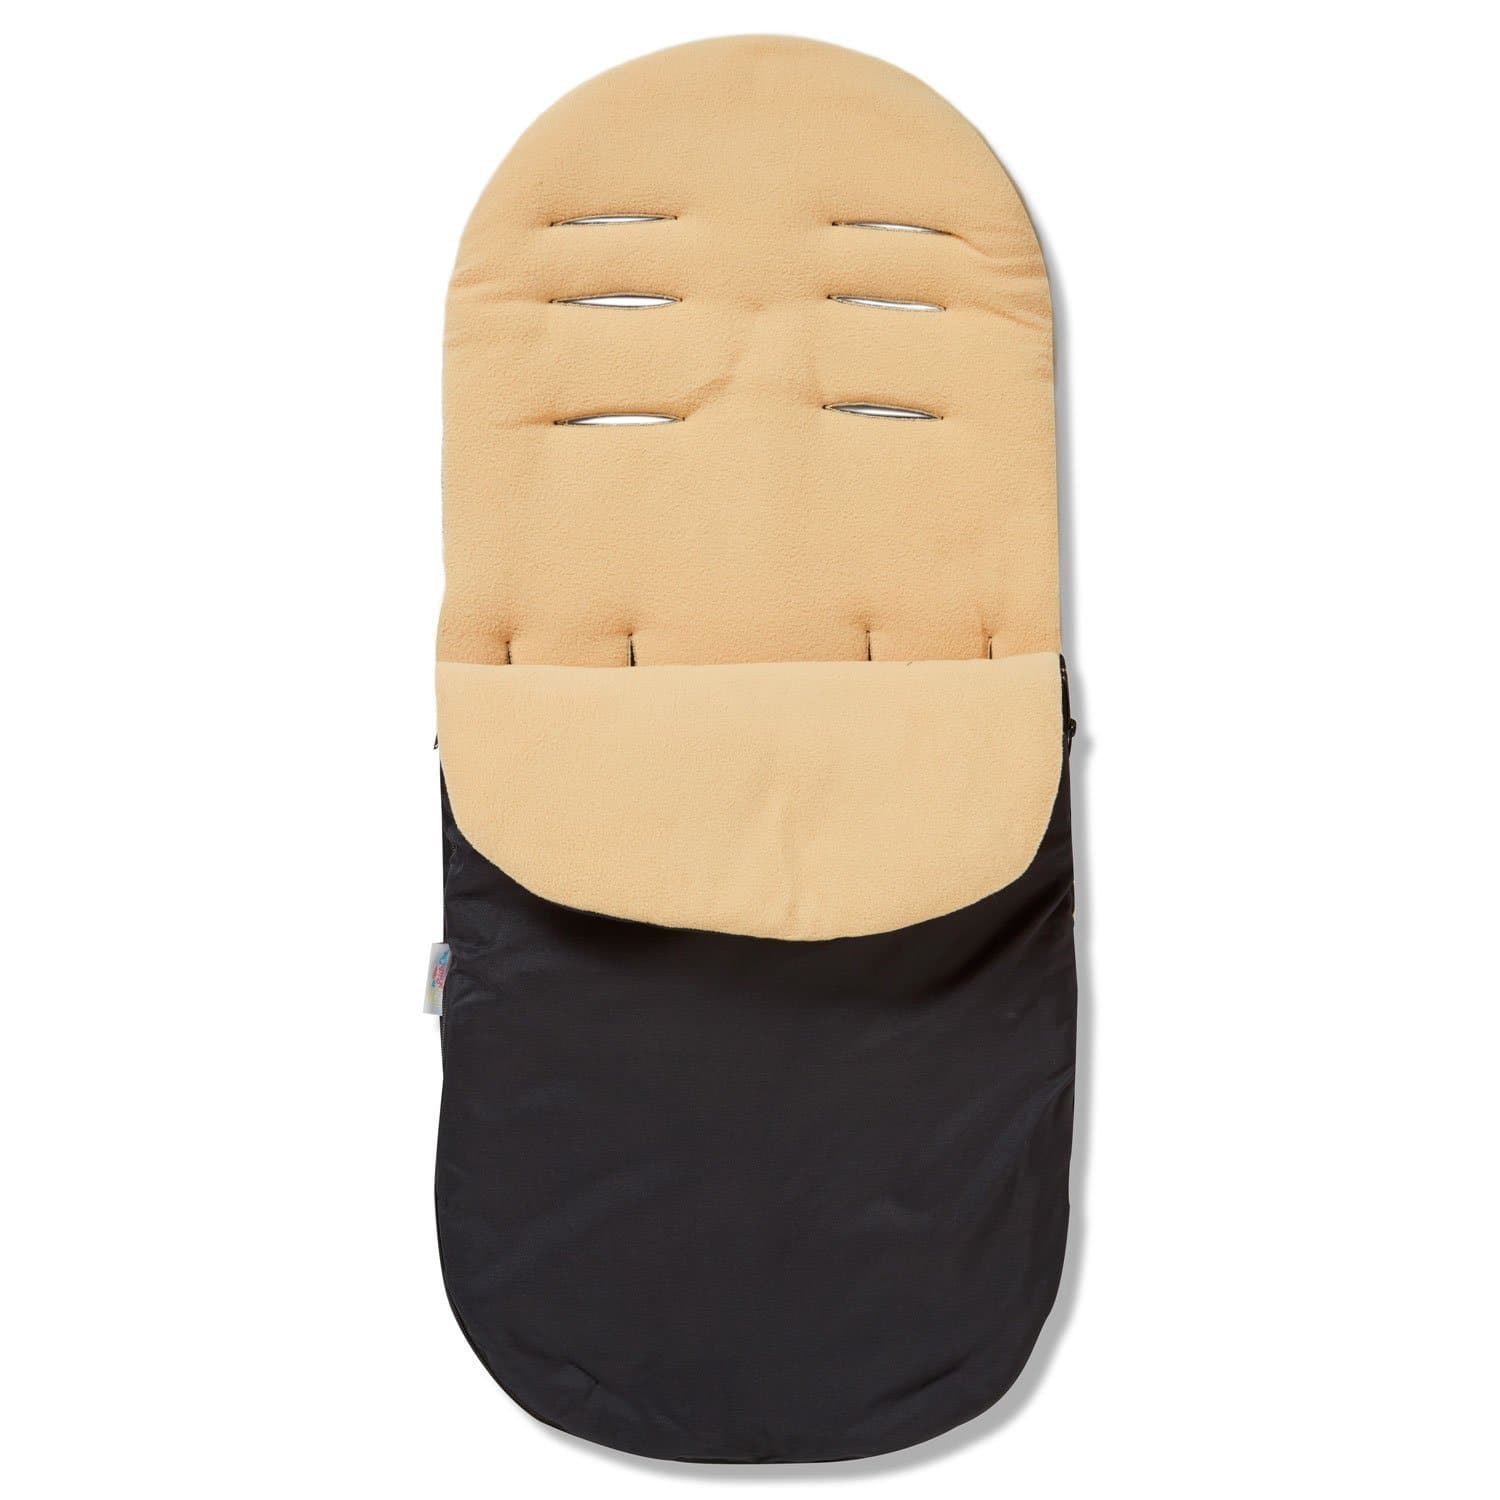 Footmuff / Cosy Toes Compatible with Seed - Sand / Fits All Models | For Your Little One